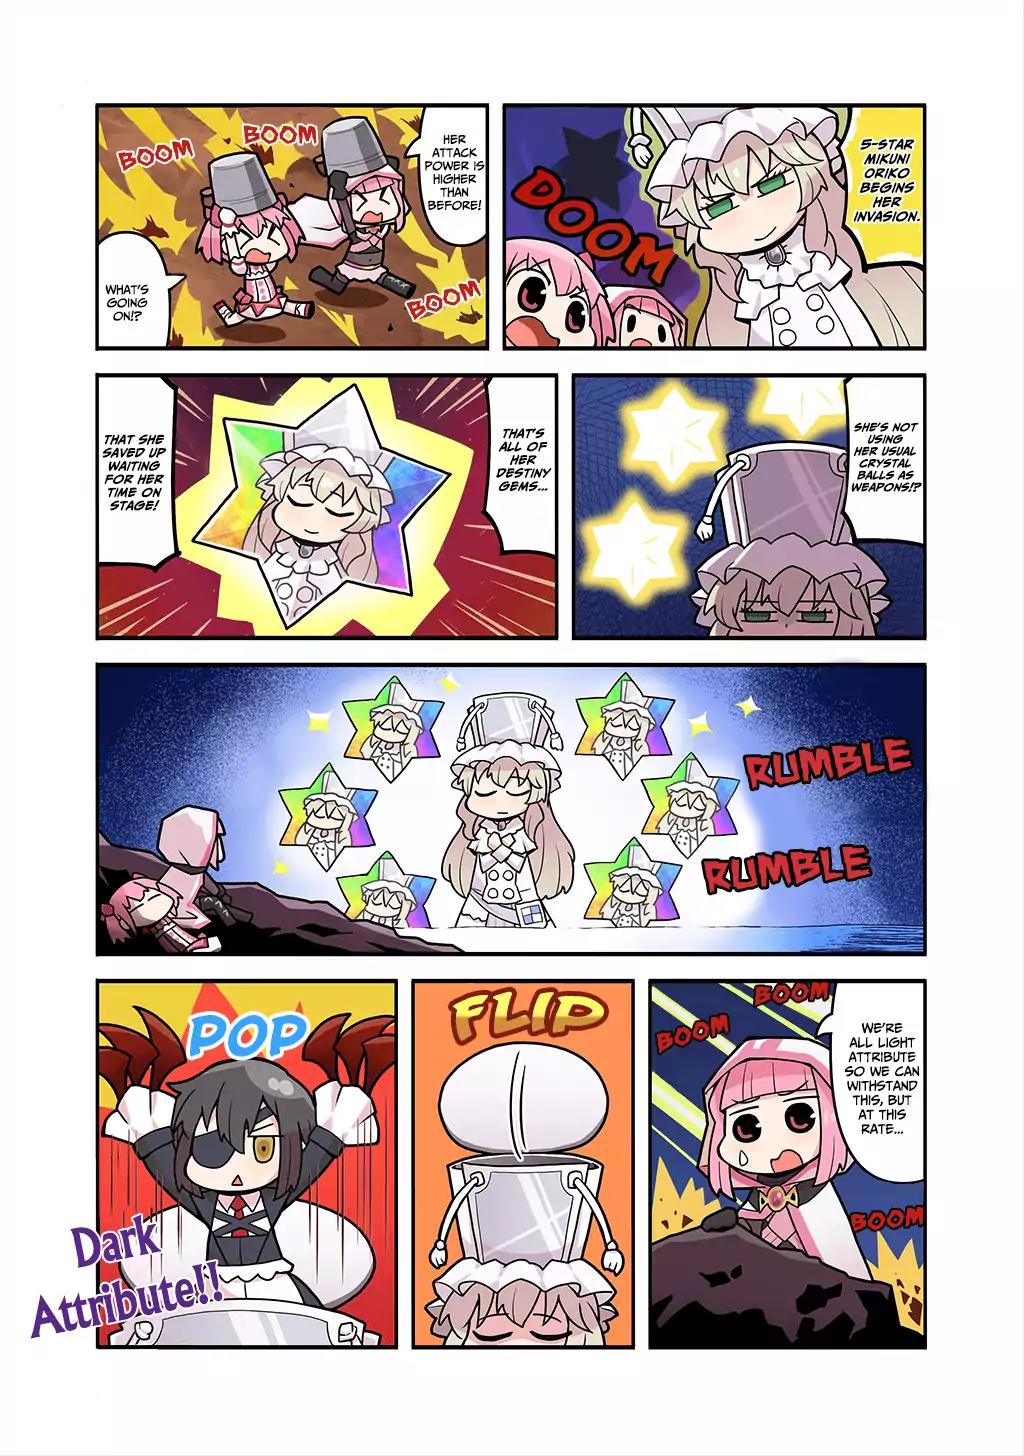 Magia Report Vol.2 Chapter 56